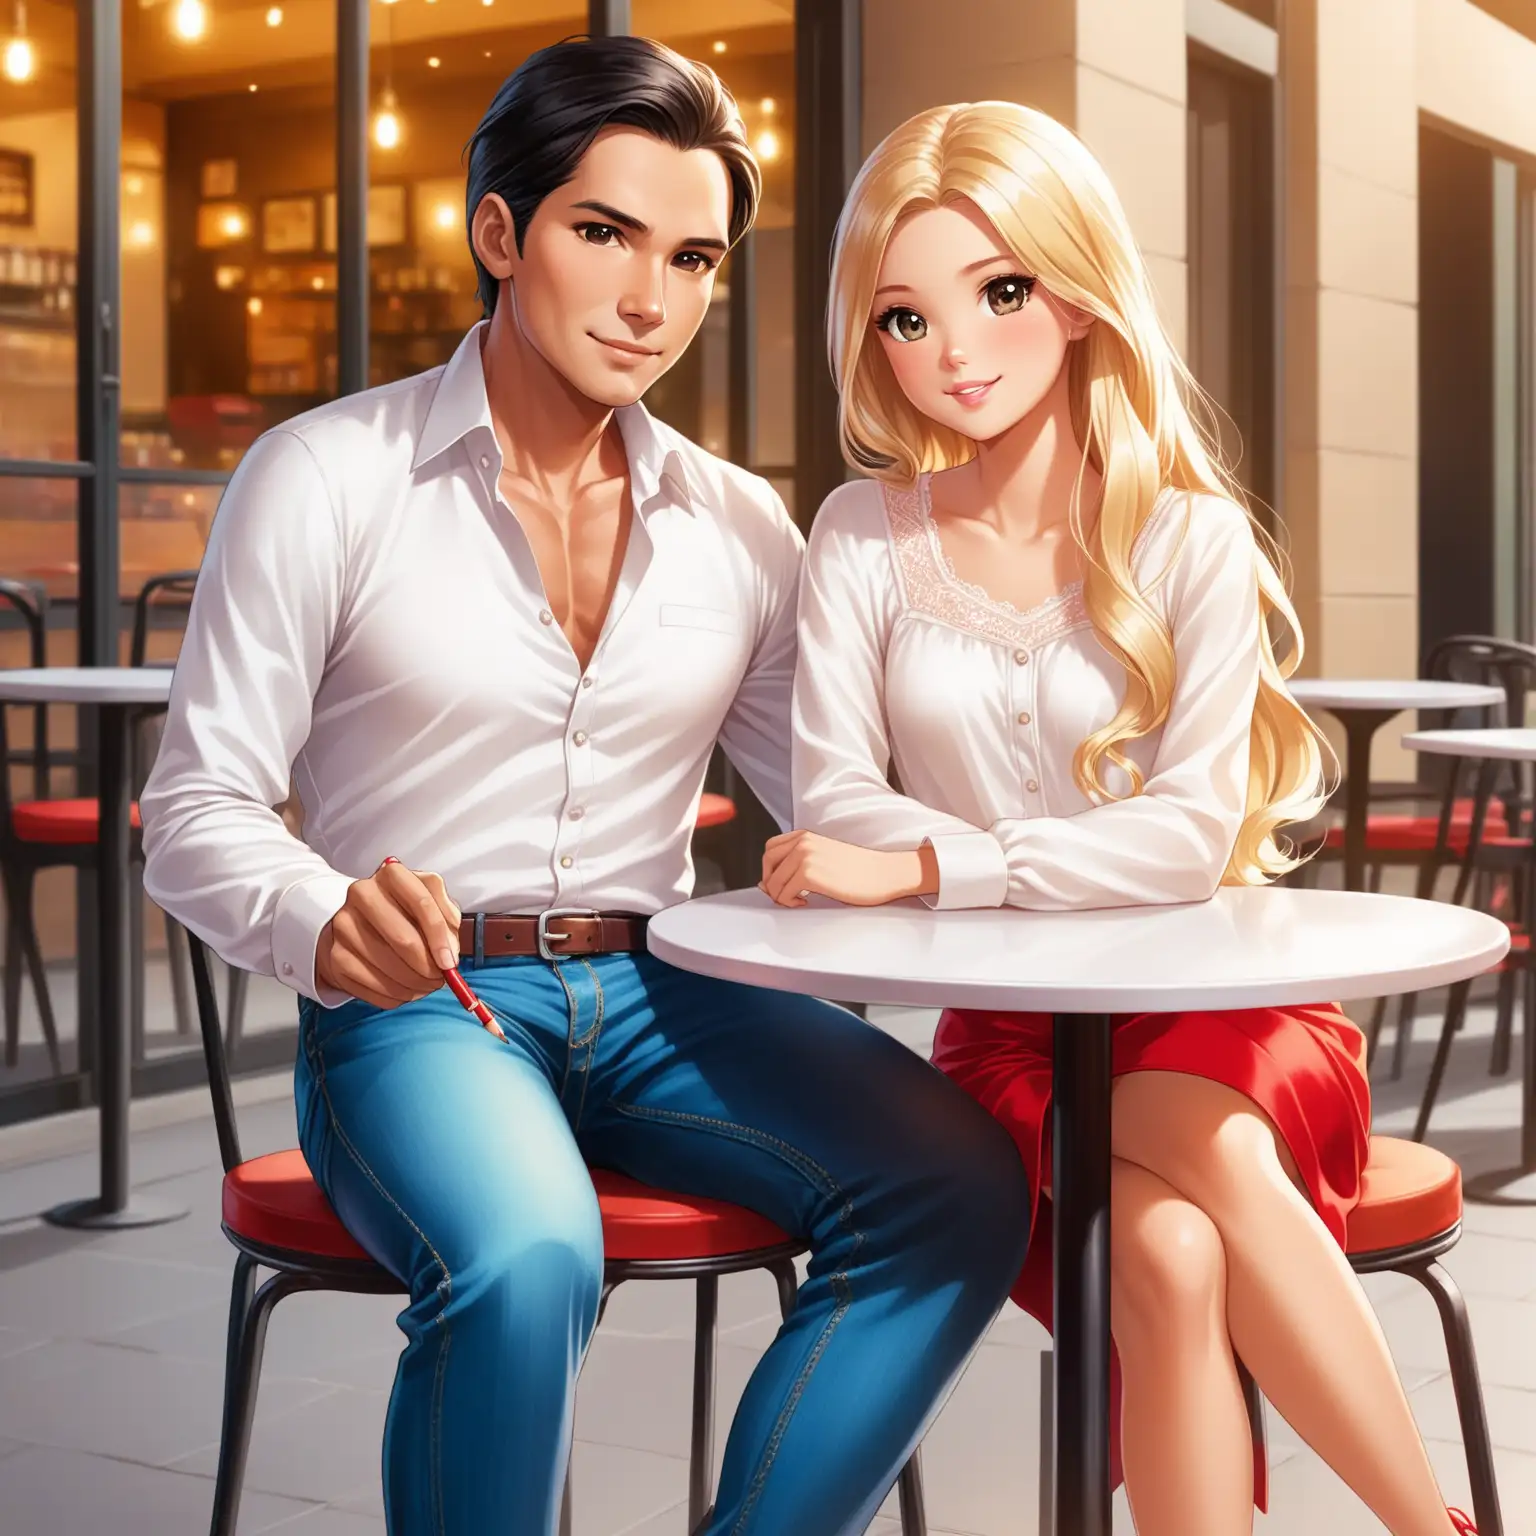 Romantic Caf Date Chelsea from Barbie and Andean Man Enjoying Drinks Together